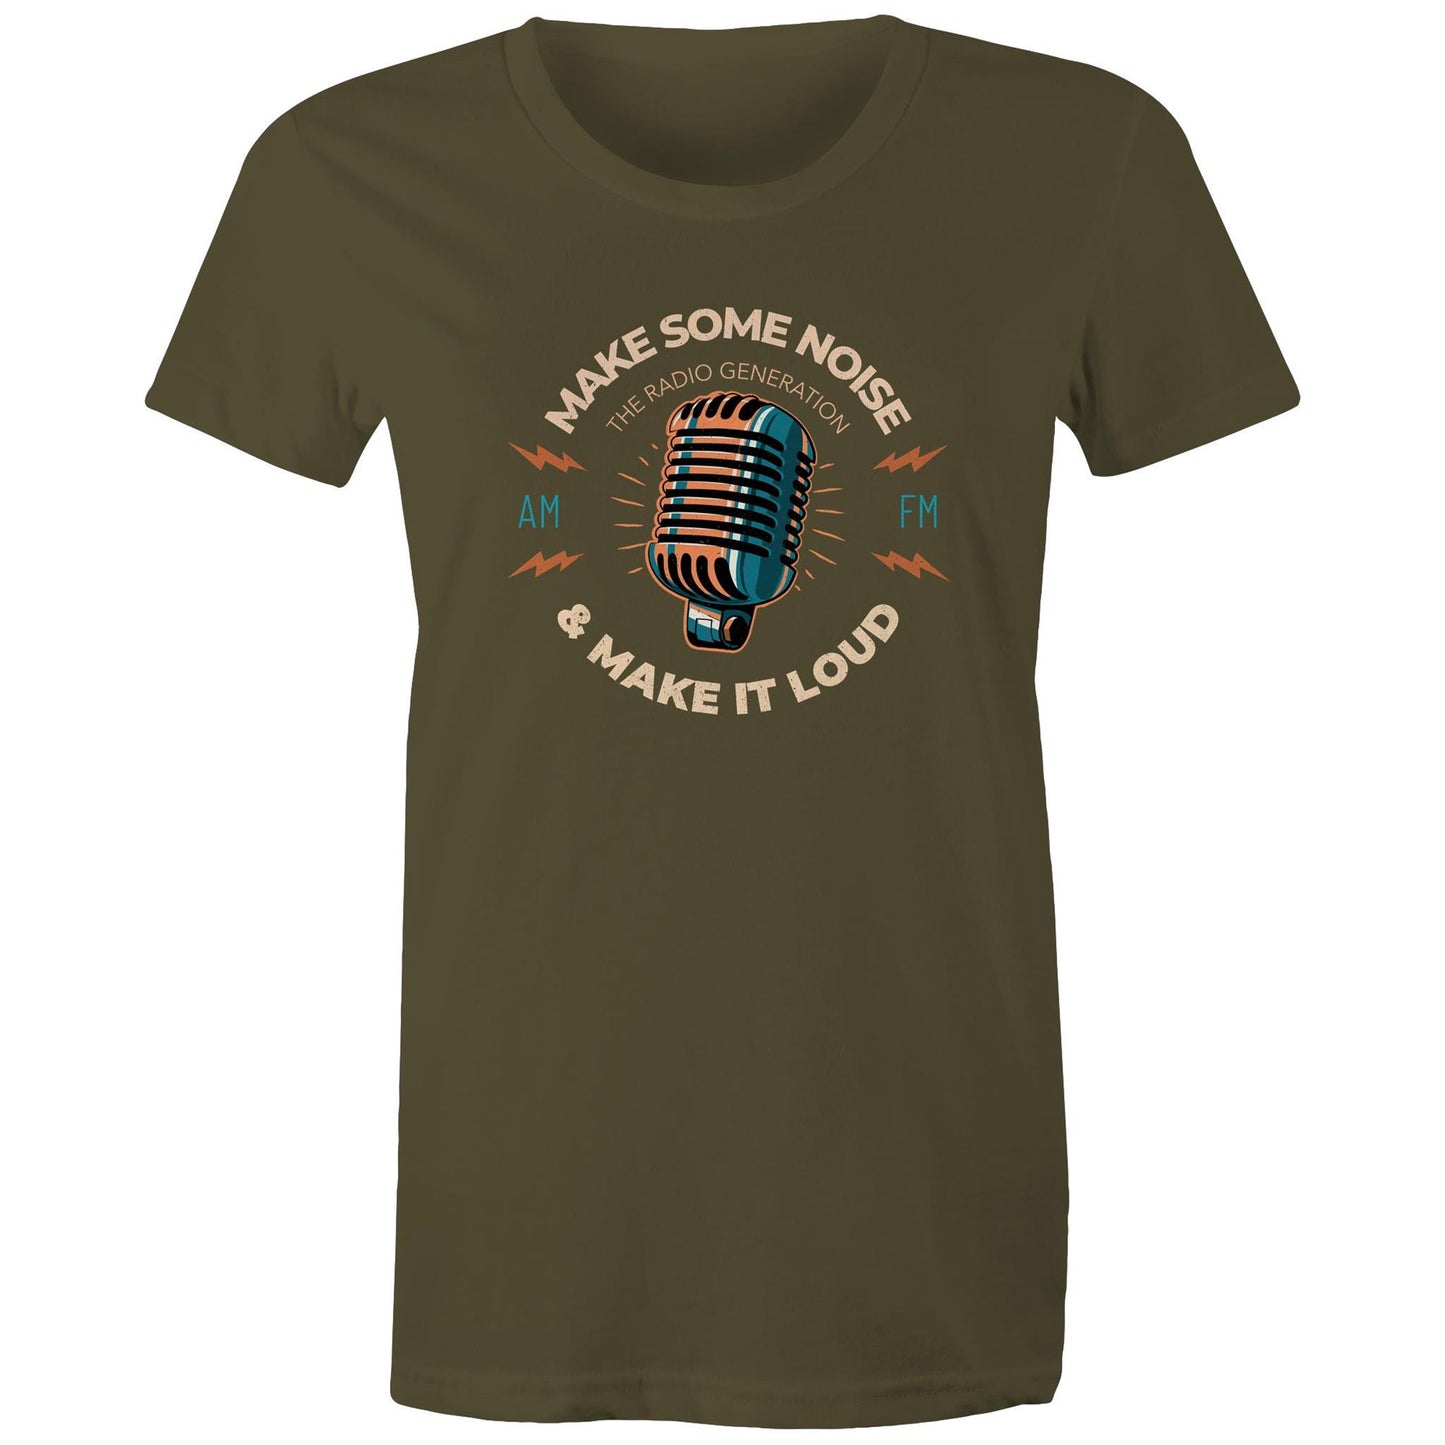 Make Some Noise And Make It Loud - Womens T-shirt Army Womens T-shirt Music